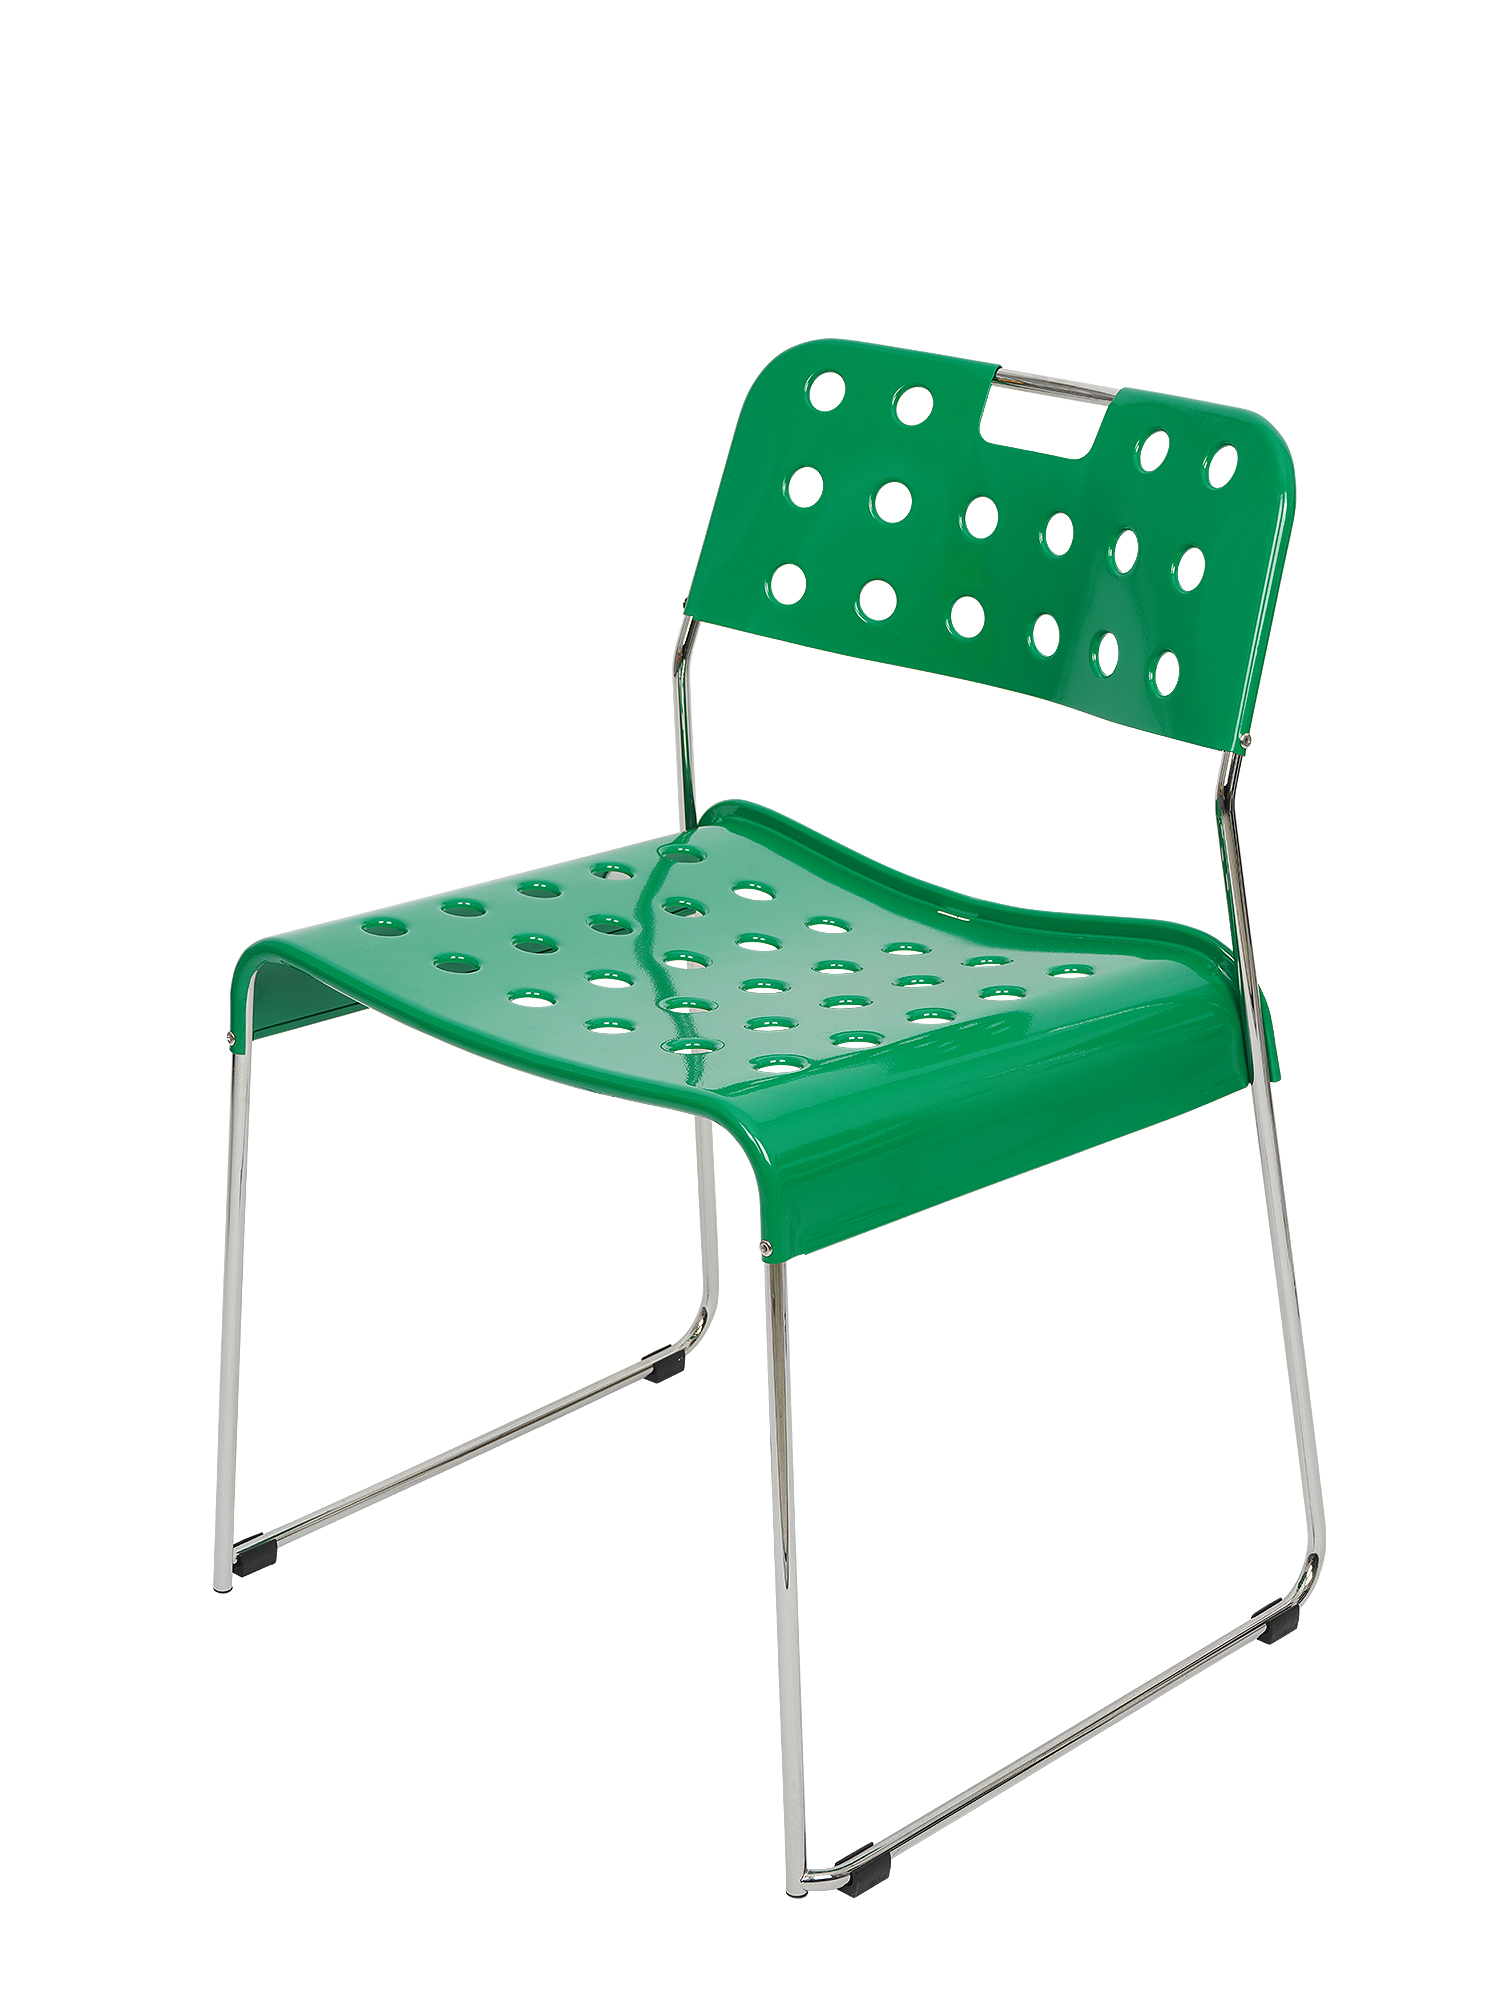 [OMK] Omkstak Side Chair Mint Green